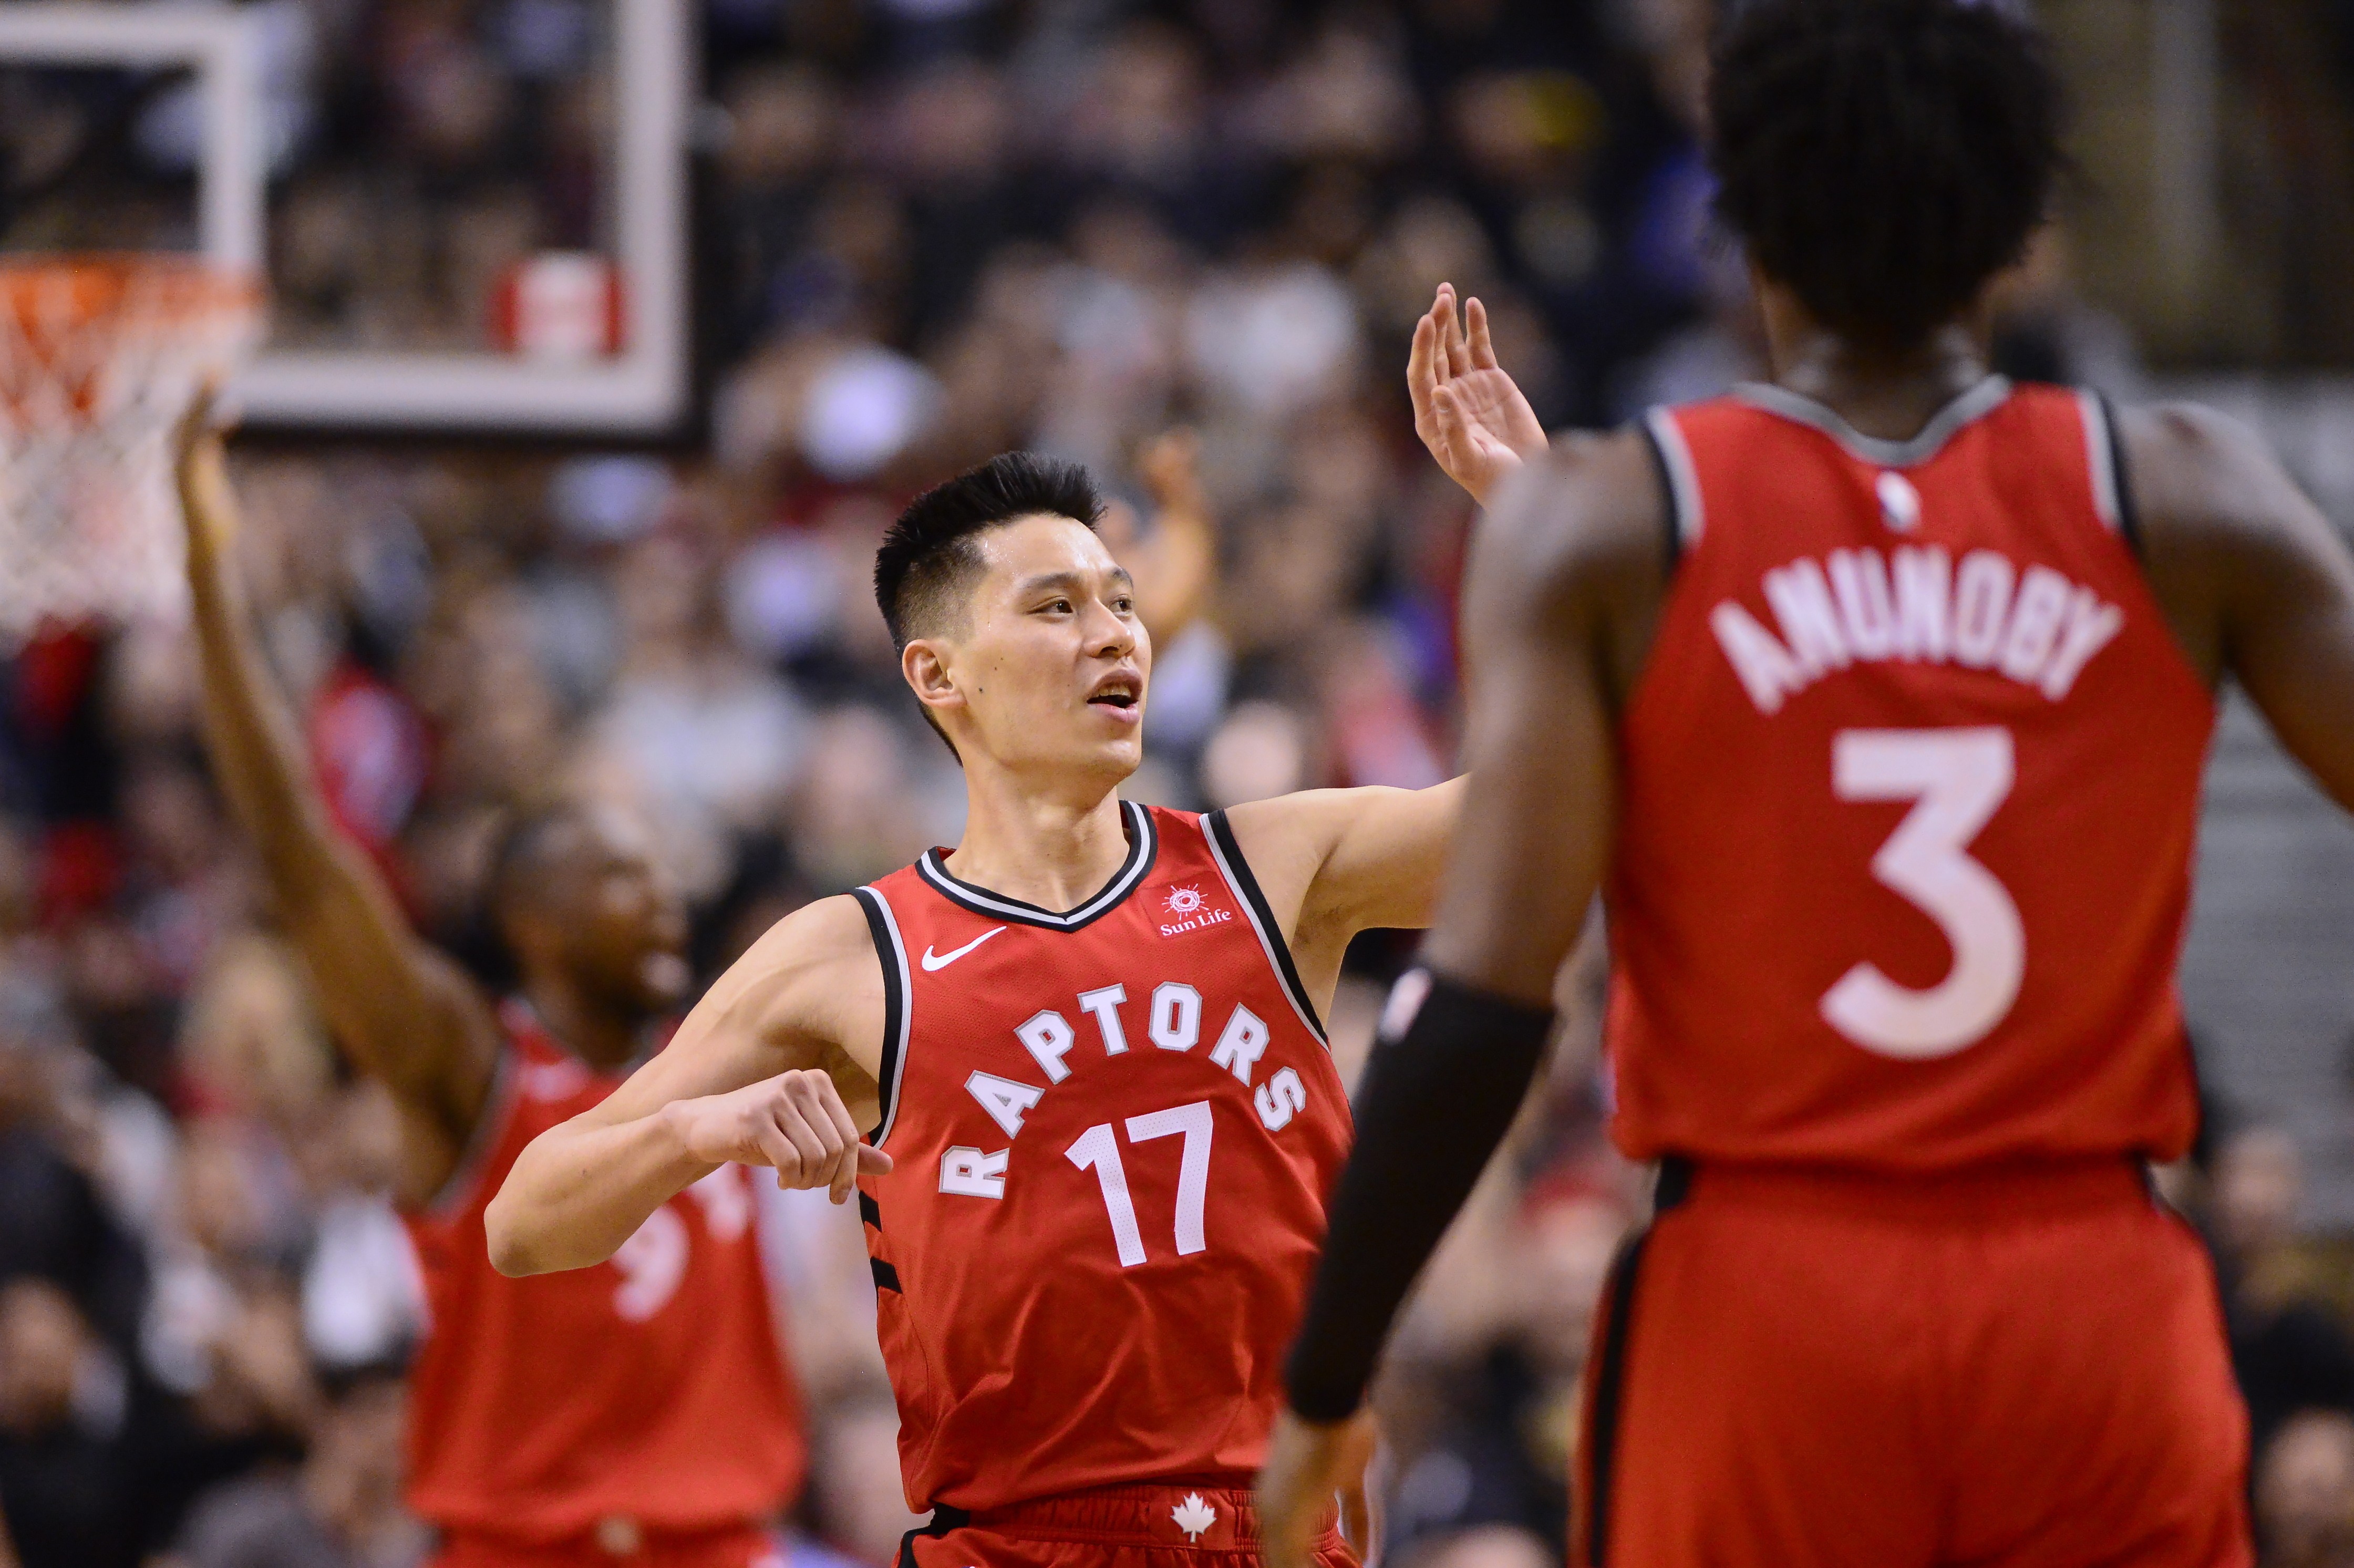 Jeremy Lin: Race Played a Part in End of NBA Career